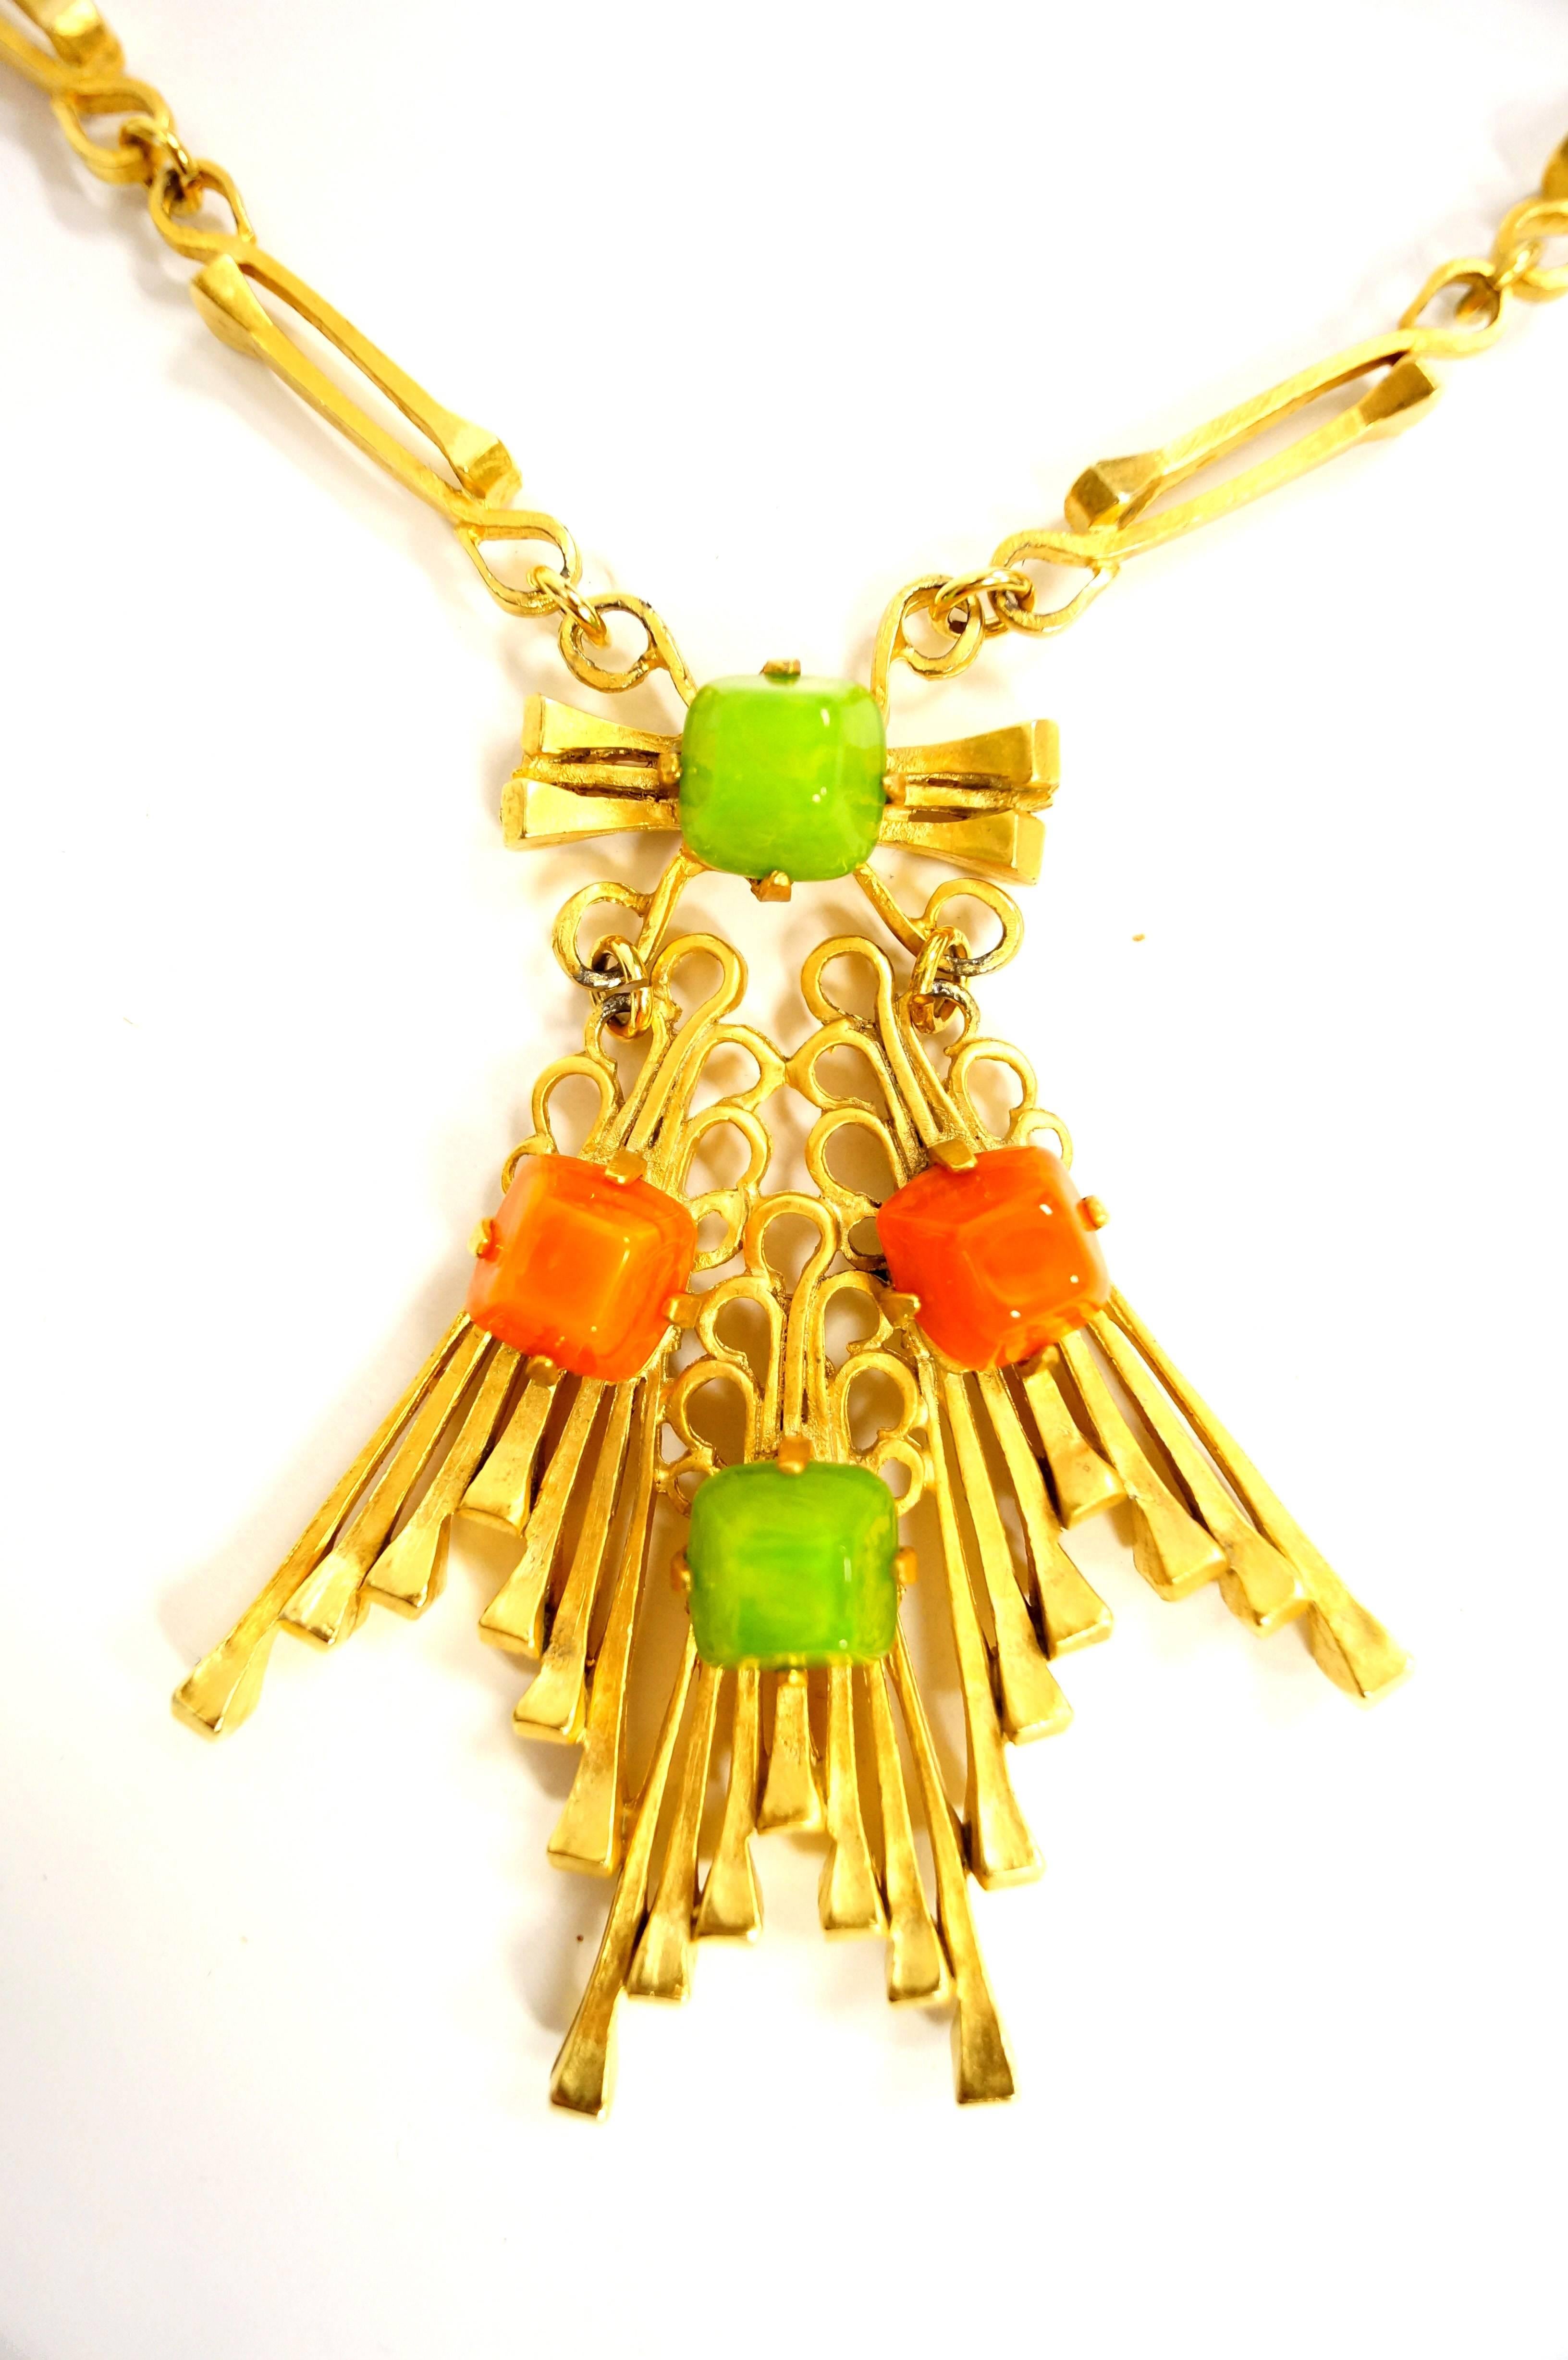 This Castlecliff jewelry set is stunning! The necklace is composed of gold tone horseshoe nails arranged in a sunburst slice, emanating from a lime green sugarloaf cabochon. The sunburst dangles freely from the primary cabochon, and is adorned with